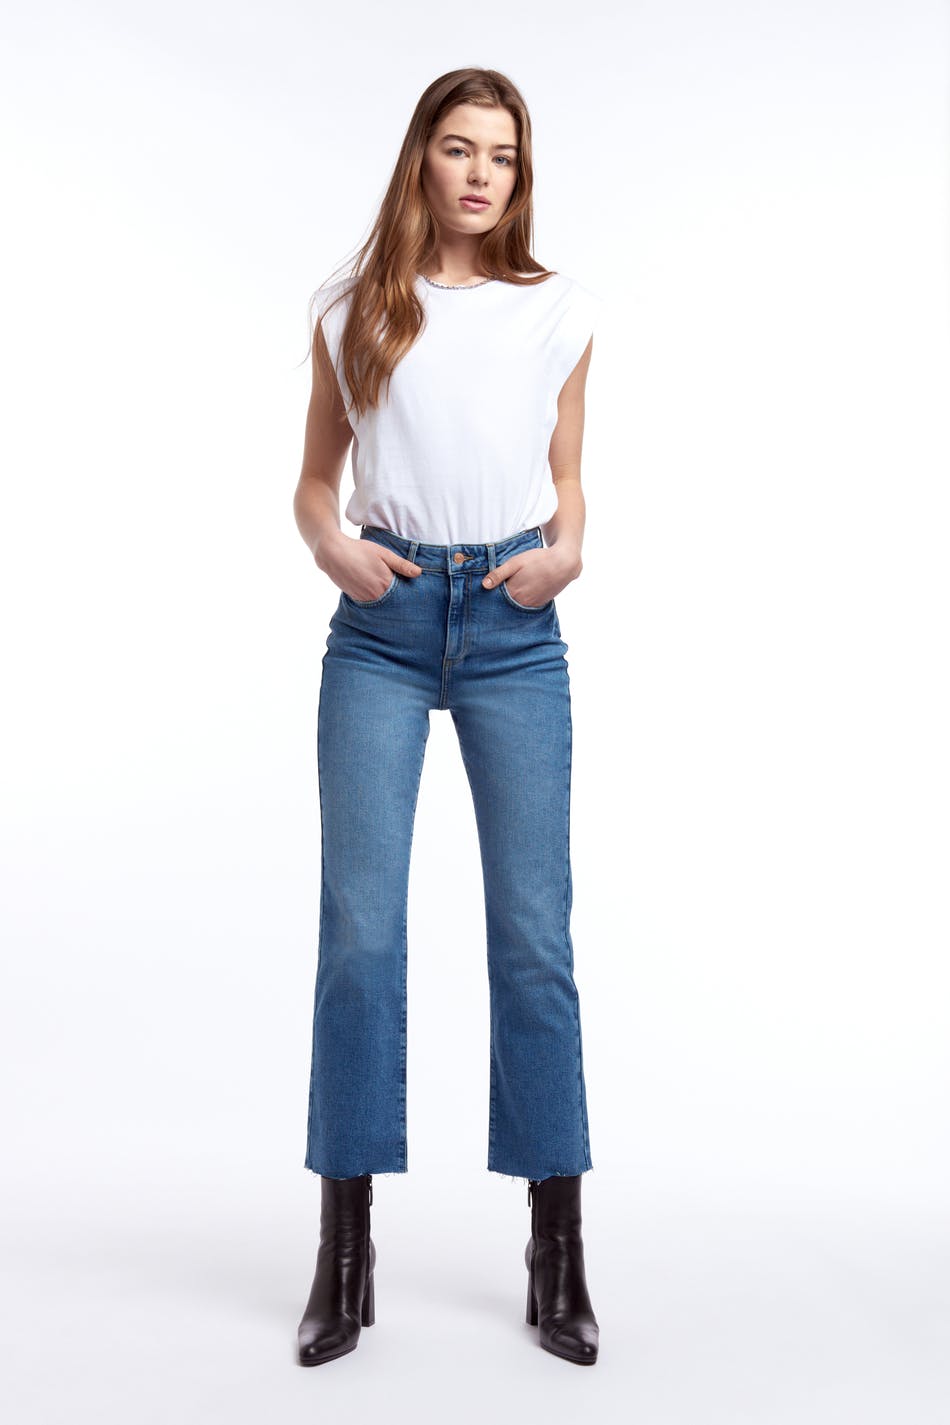 flare jeans gina tricot